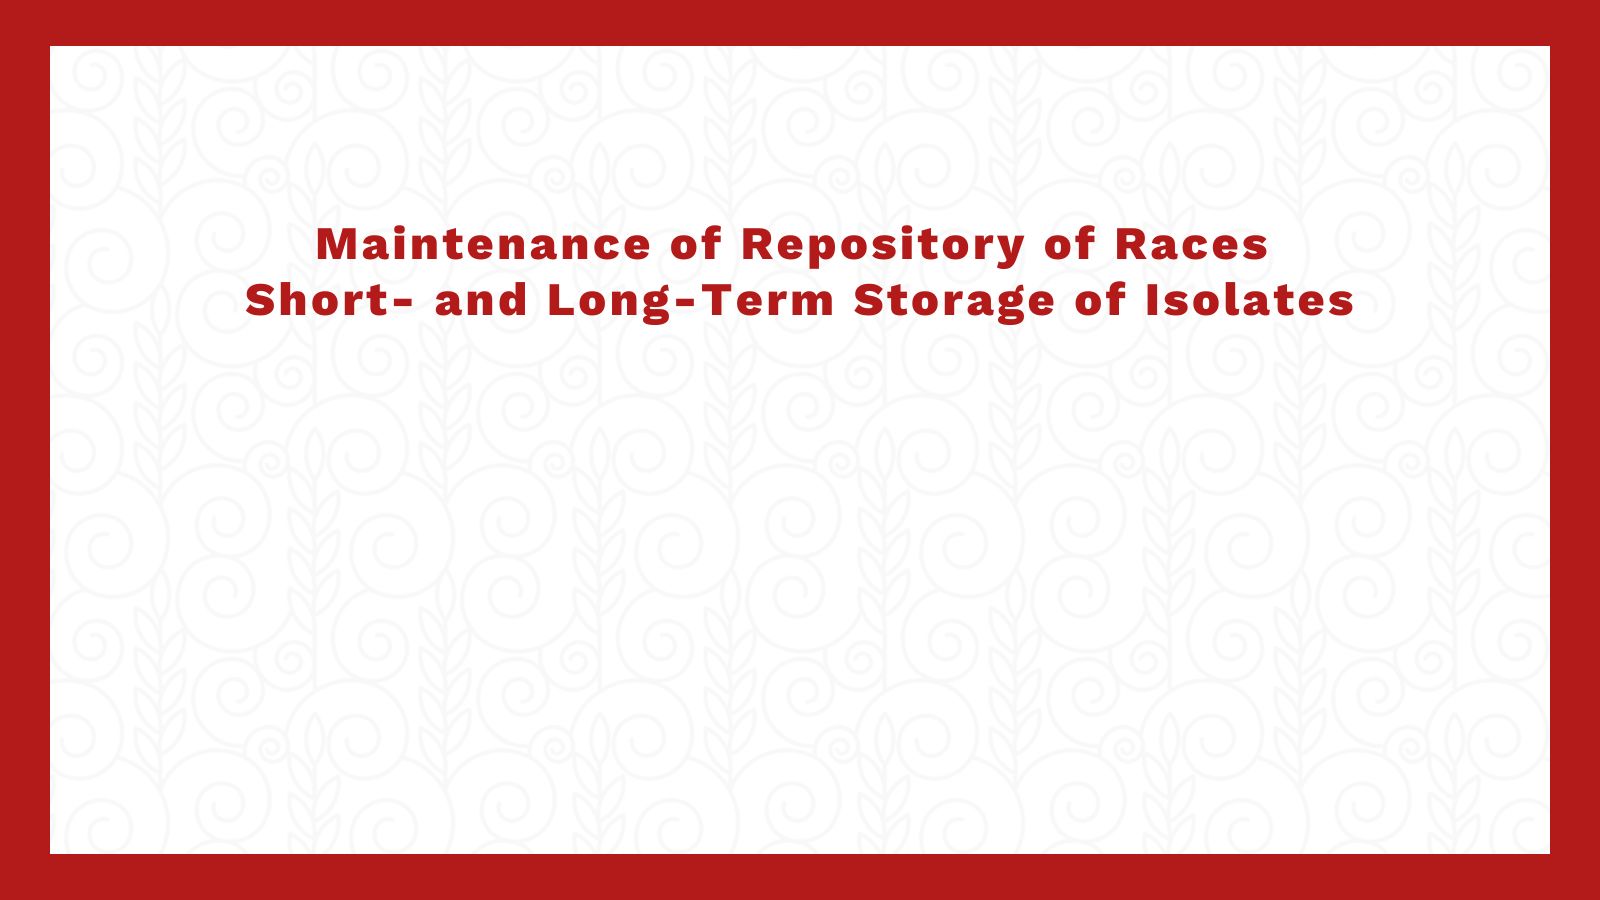 Maintenance of Repository of Races Short- and Long-Term Storage of Isolates